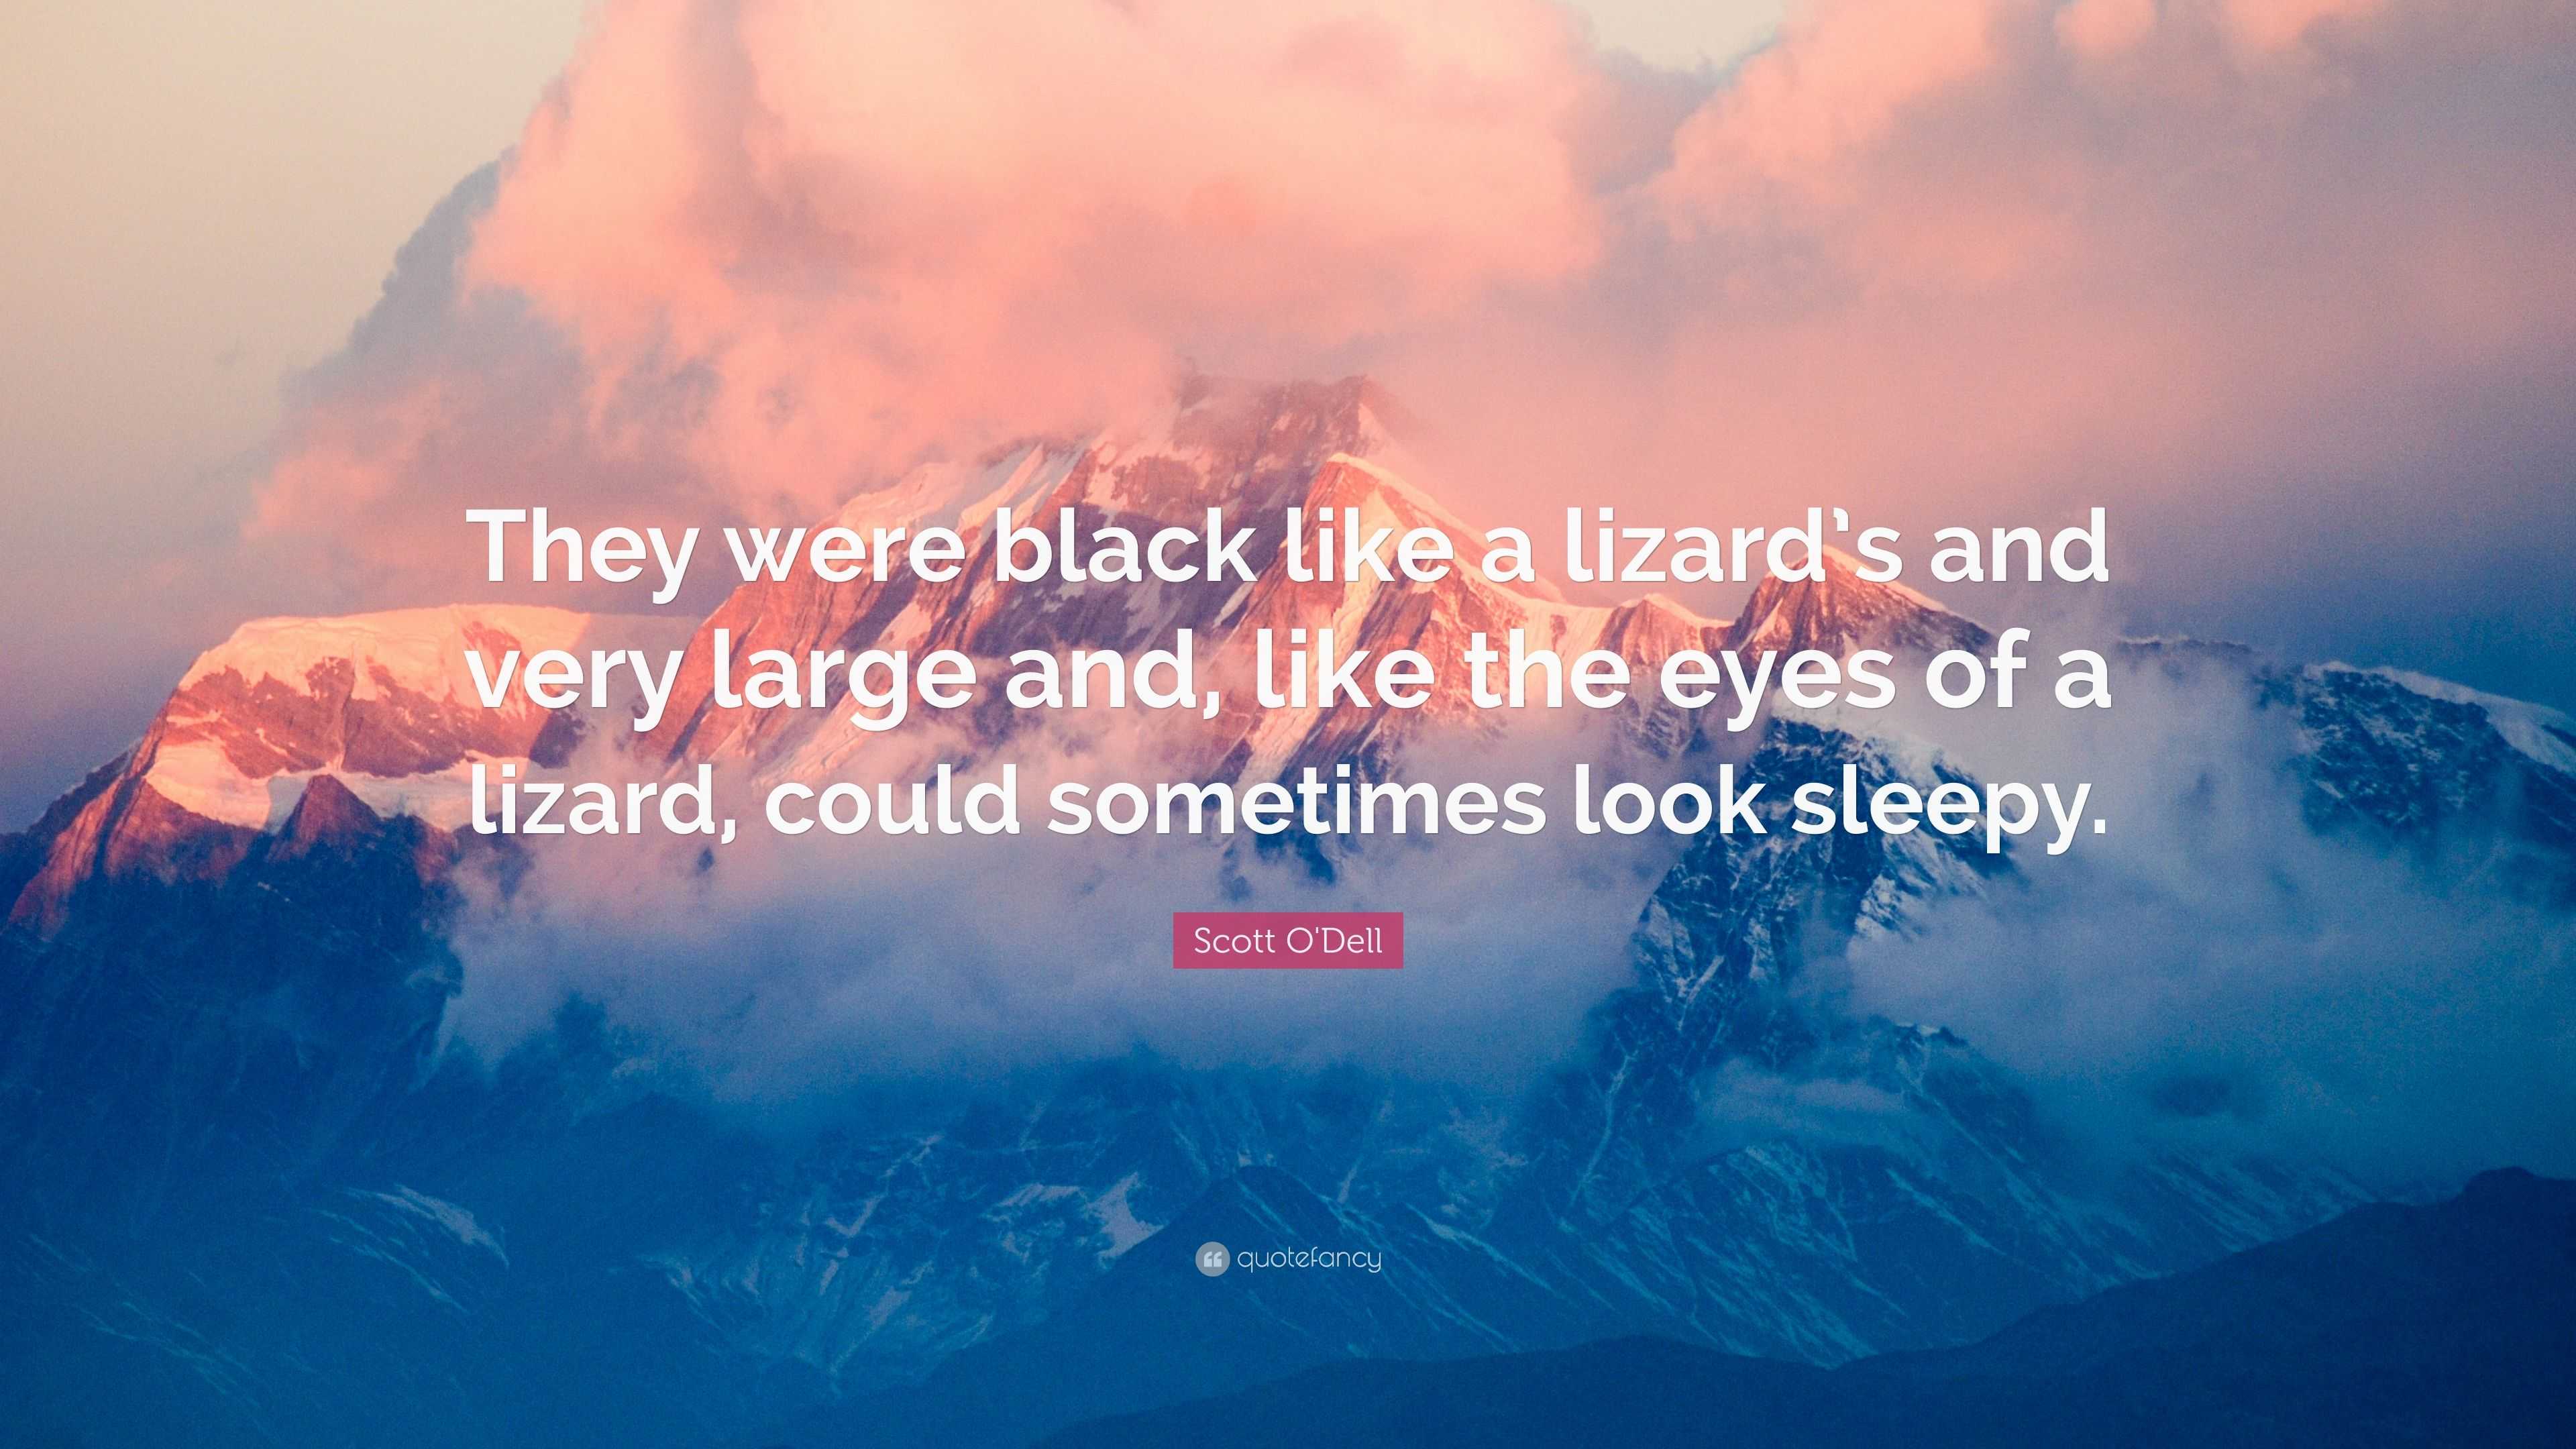 Scott O Dell Quote They Were Black Like A Lizard S And Very Large And Like The Eyes Of A Lizard Could Sometimes Look Sleepy 7 Wallpapers Quotefancy